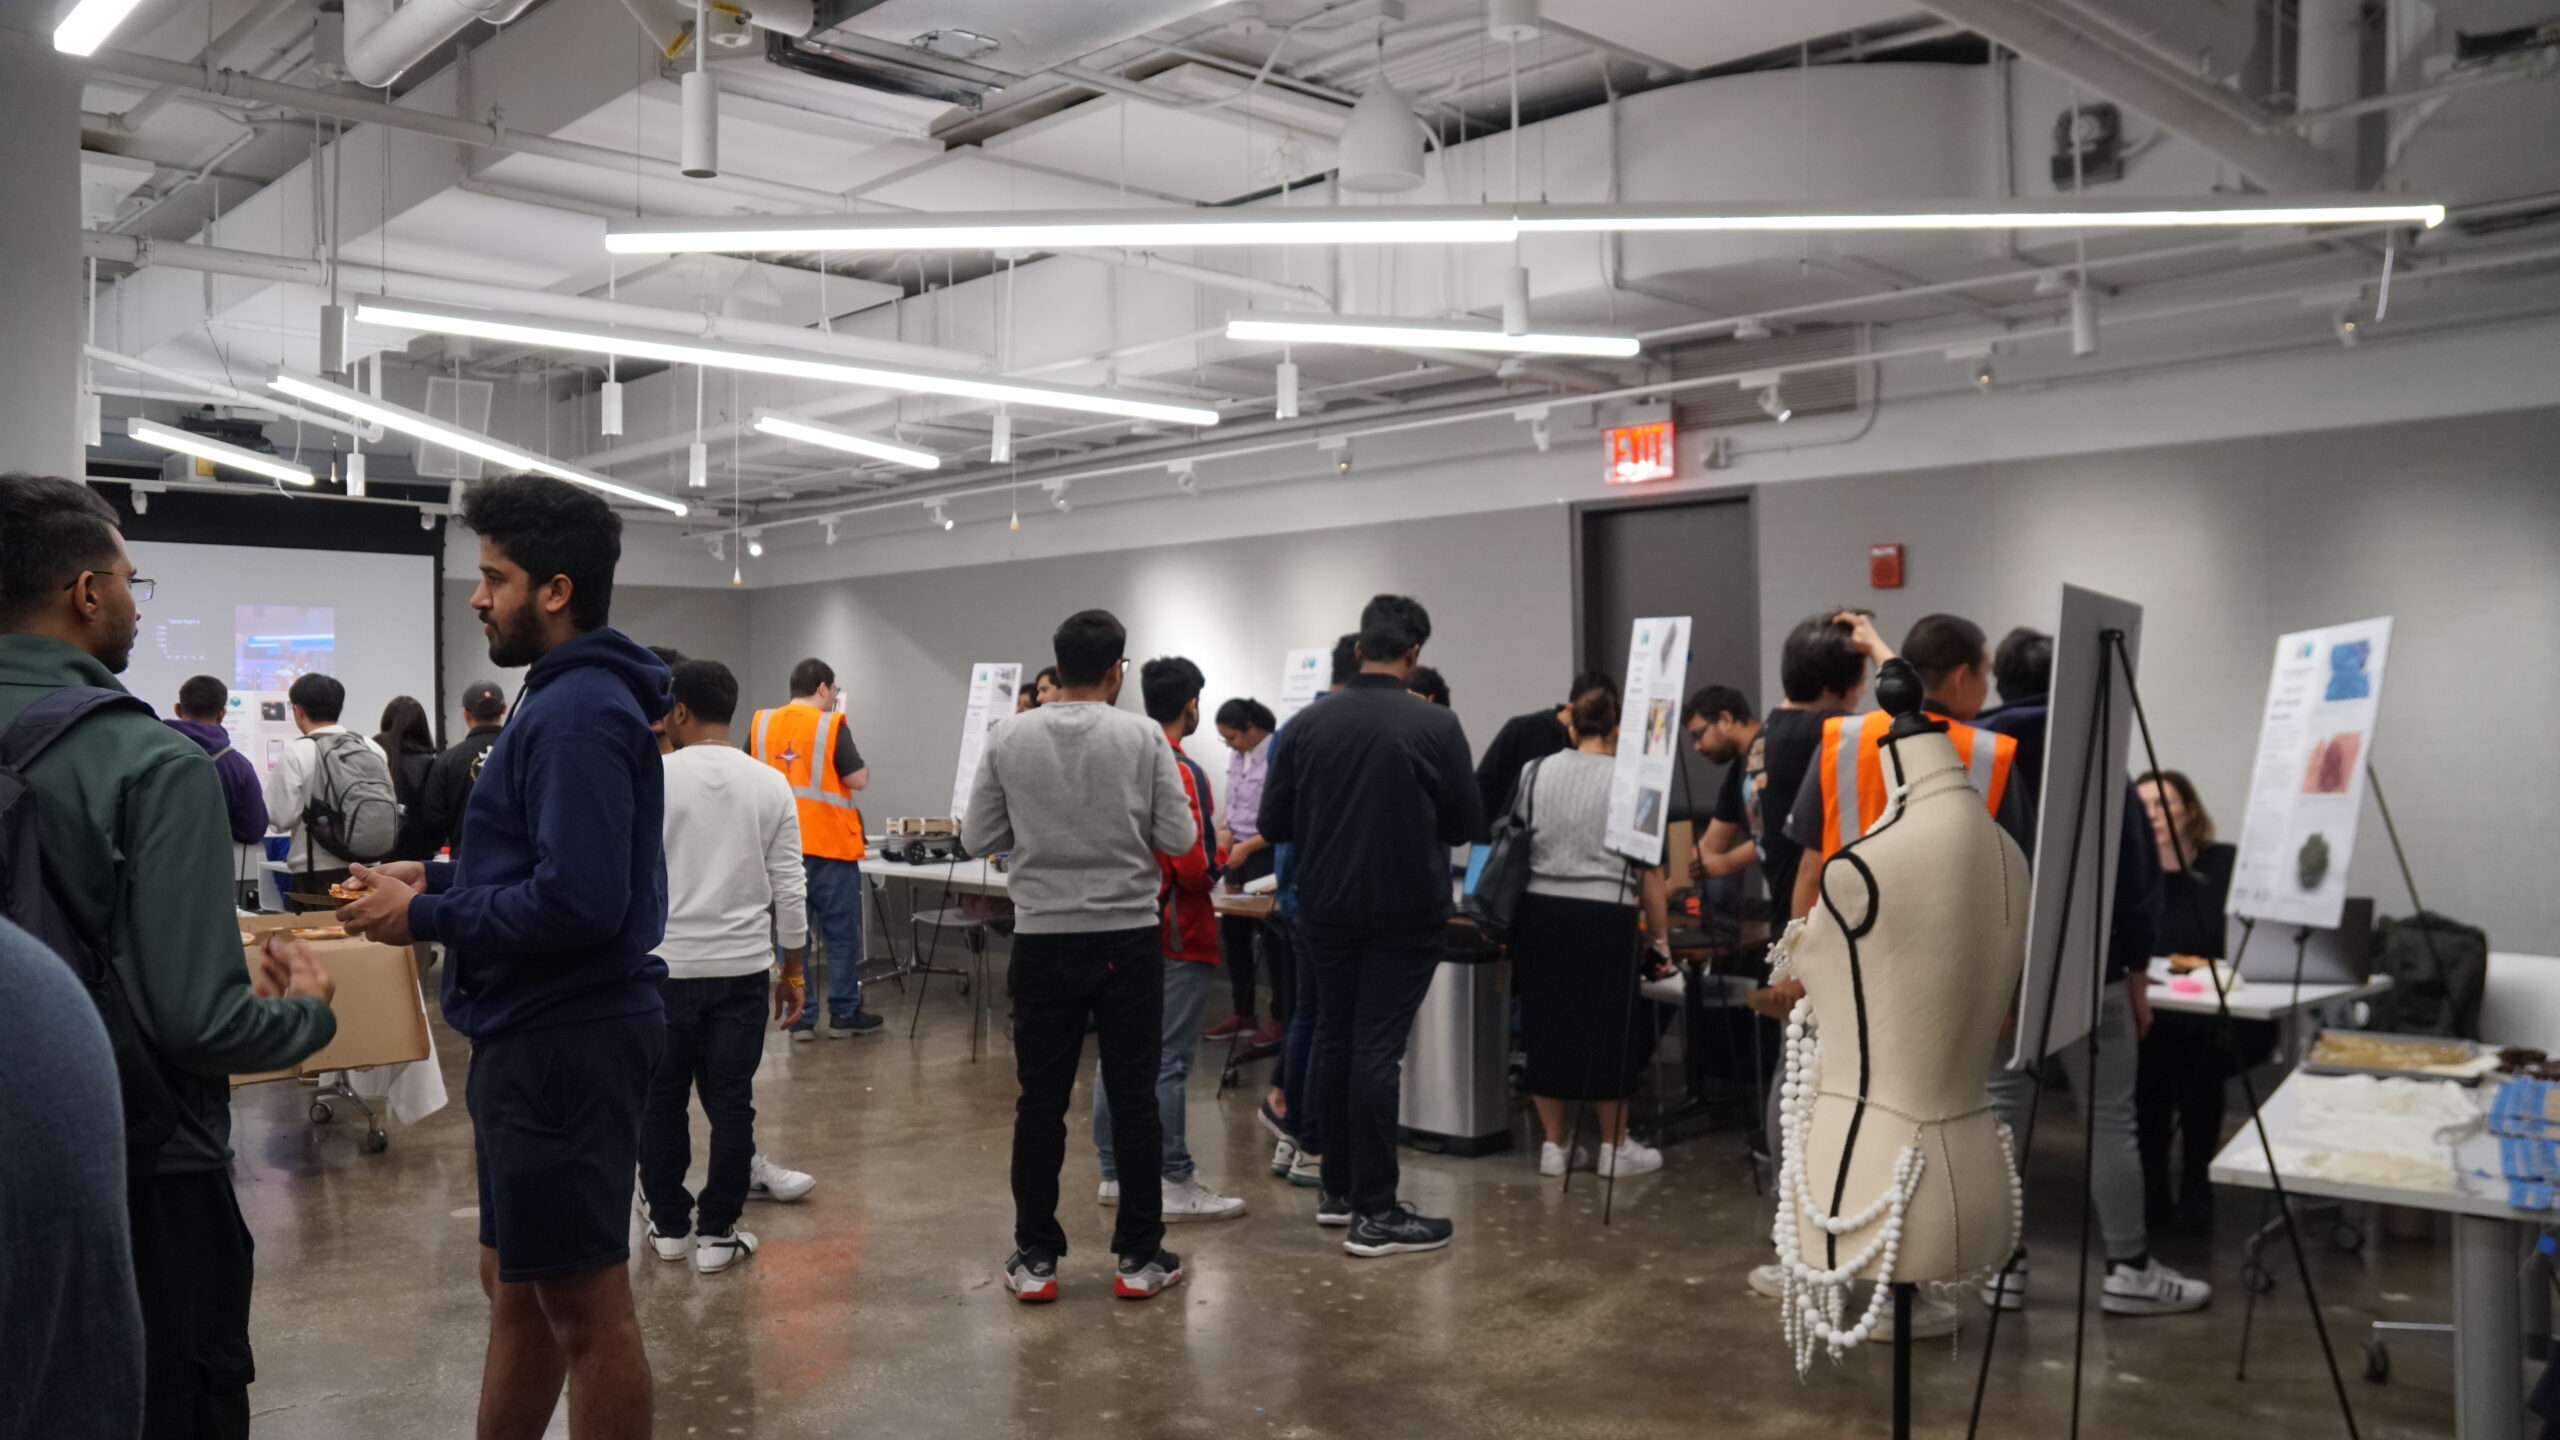 Events - NYU MakerSpace